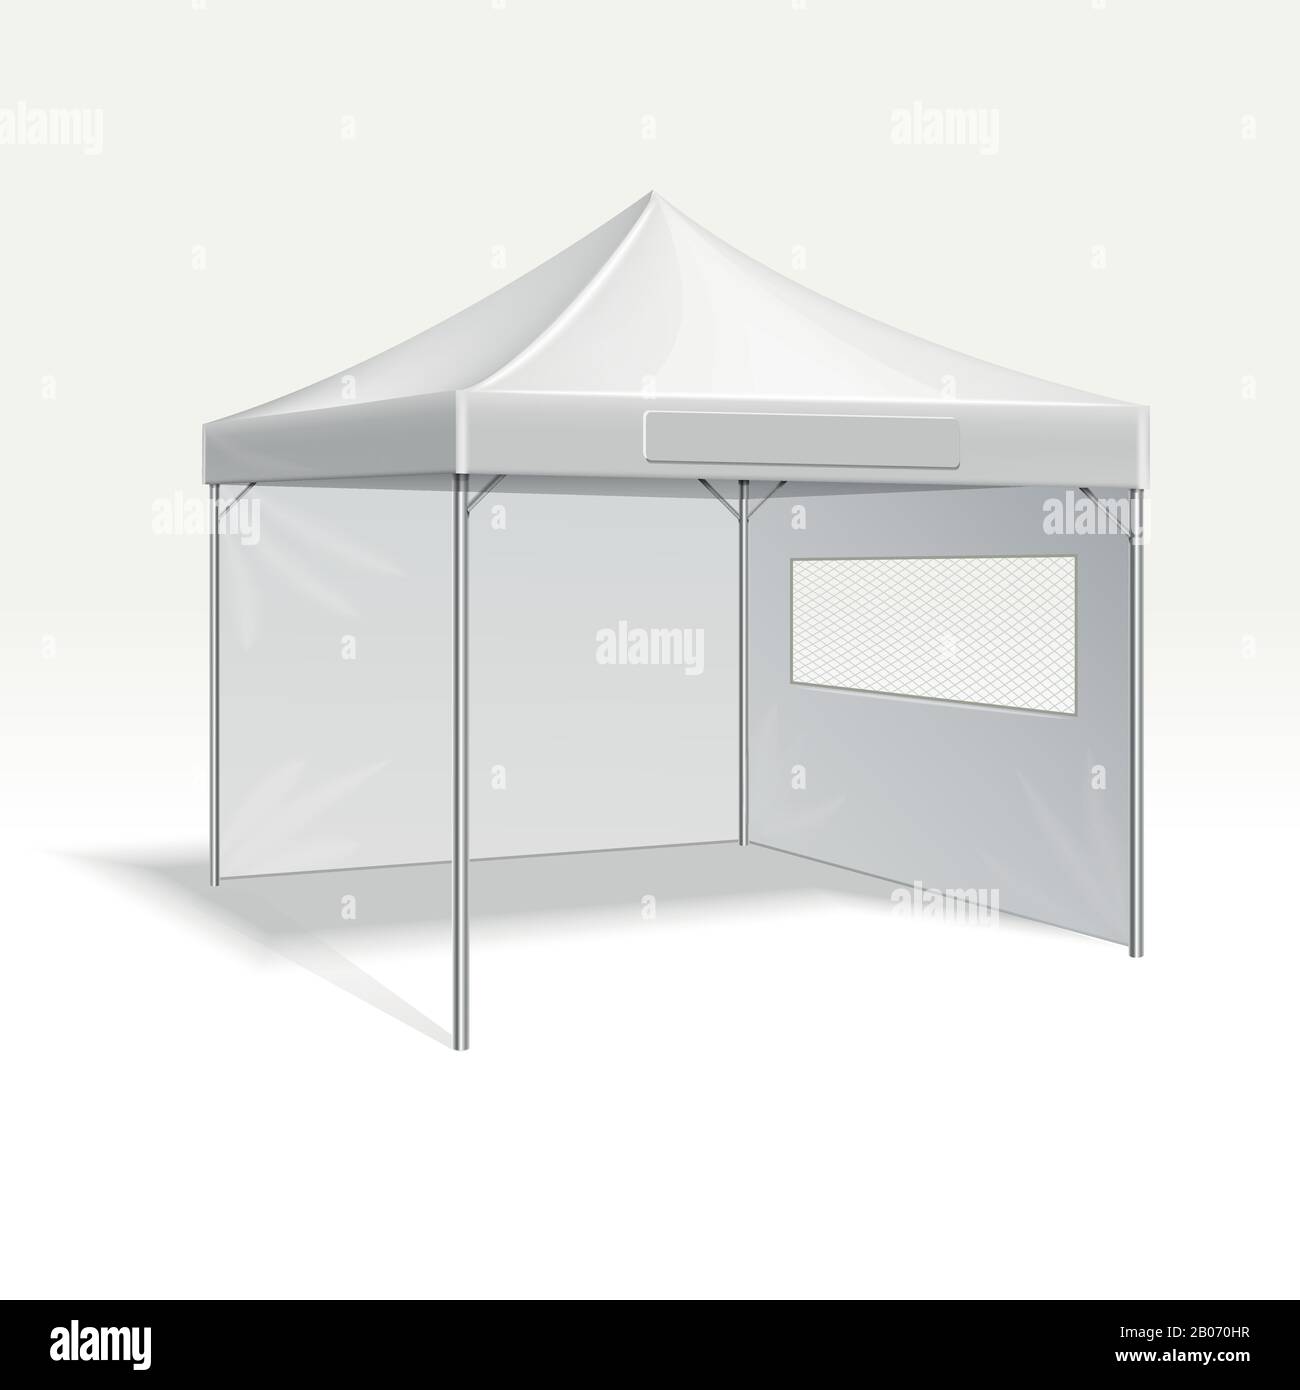 Promotional advertising folding tent vector illustration for outdoor ...